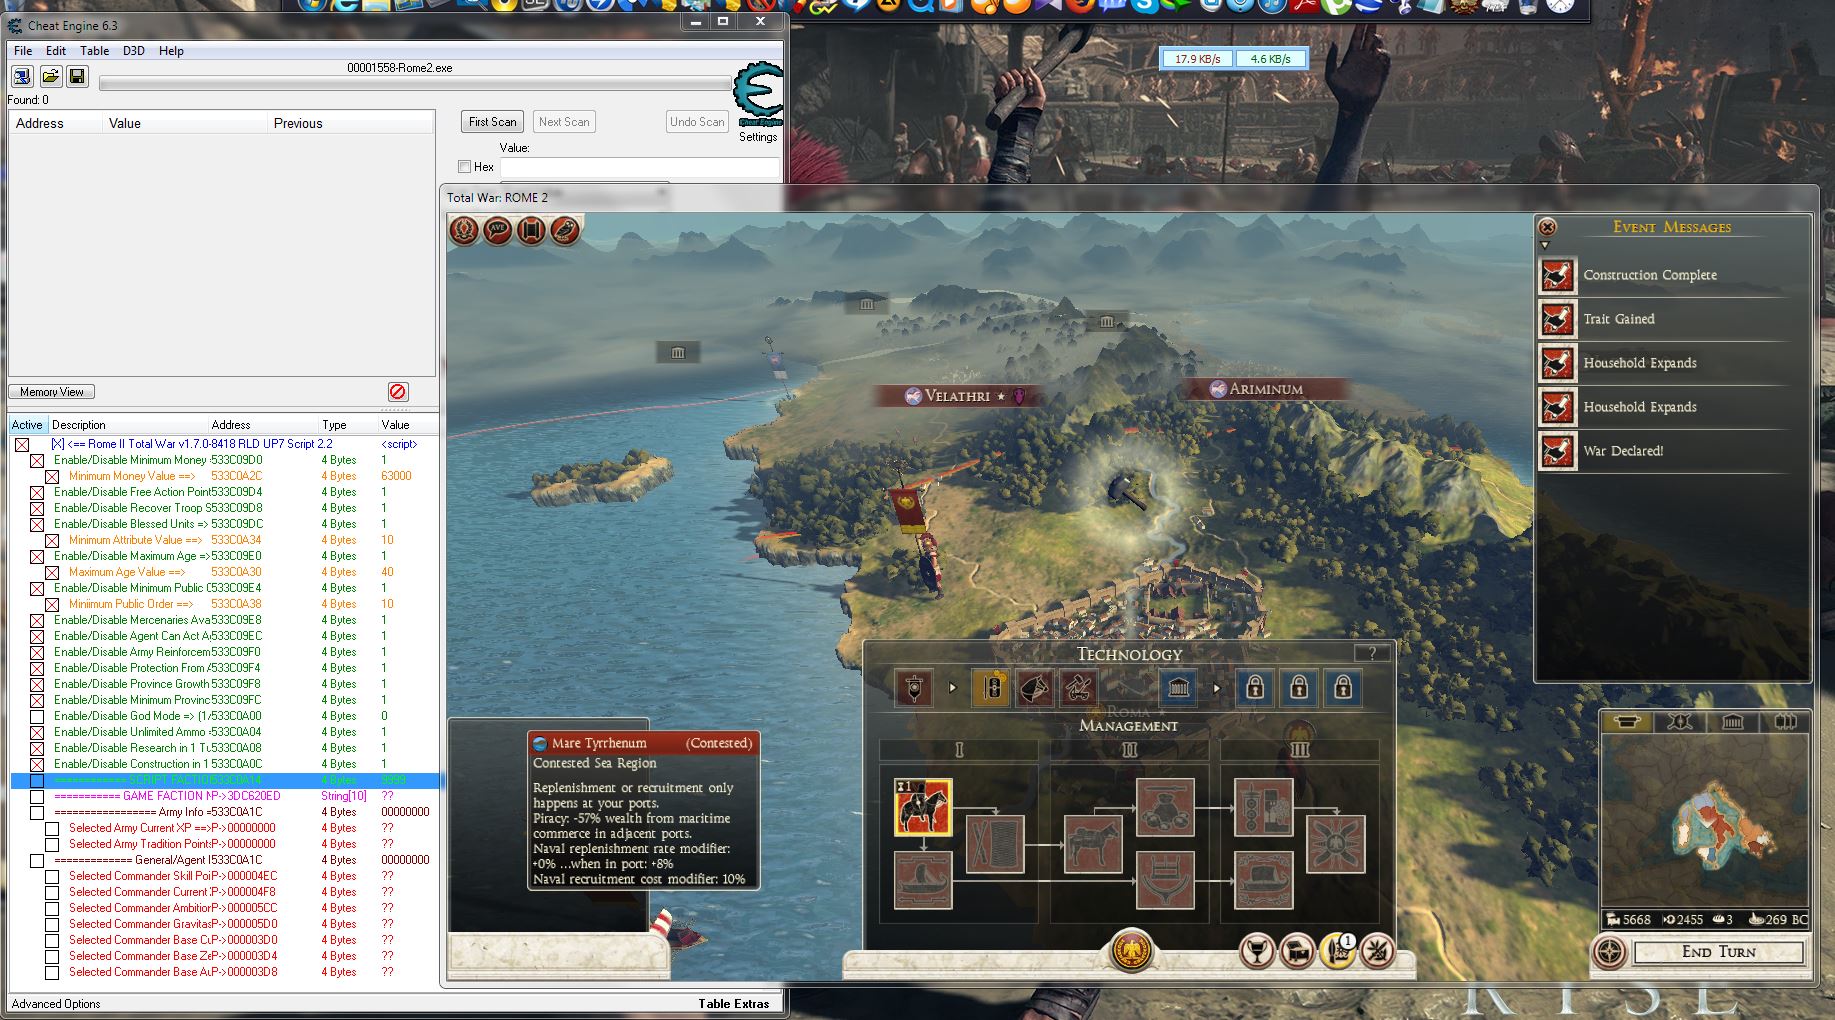 Cheat Engine :: View topic - I have a problem game Total War Rome 2